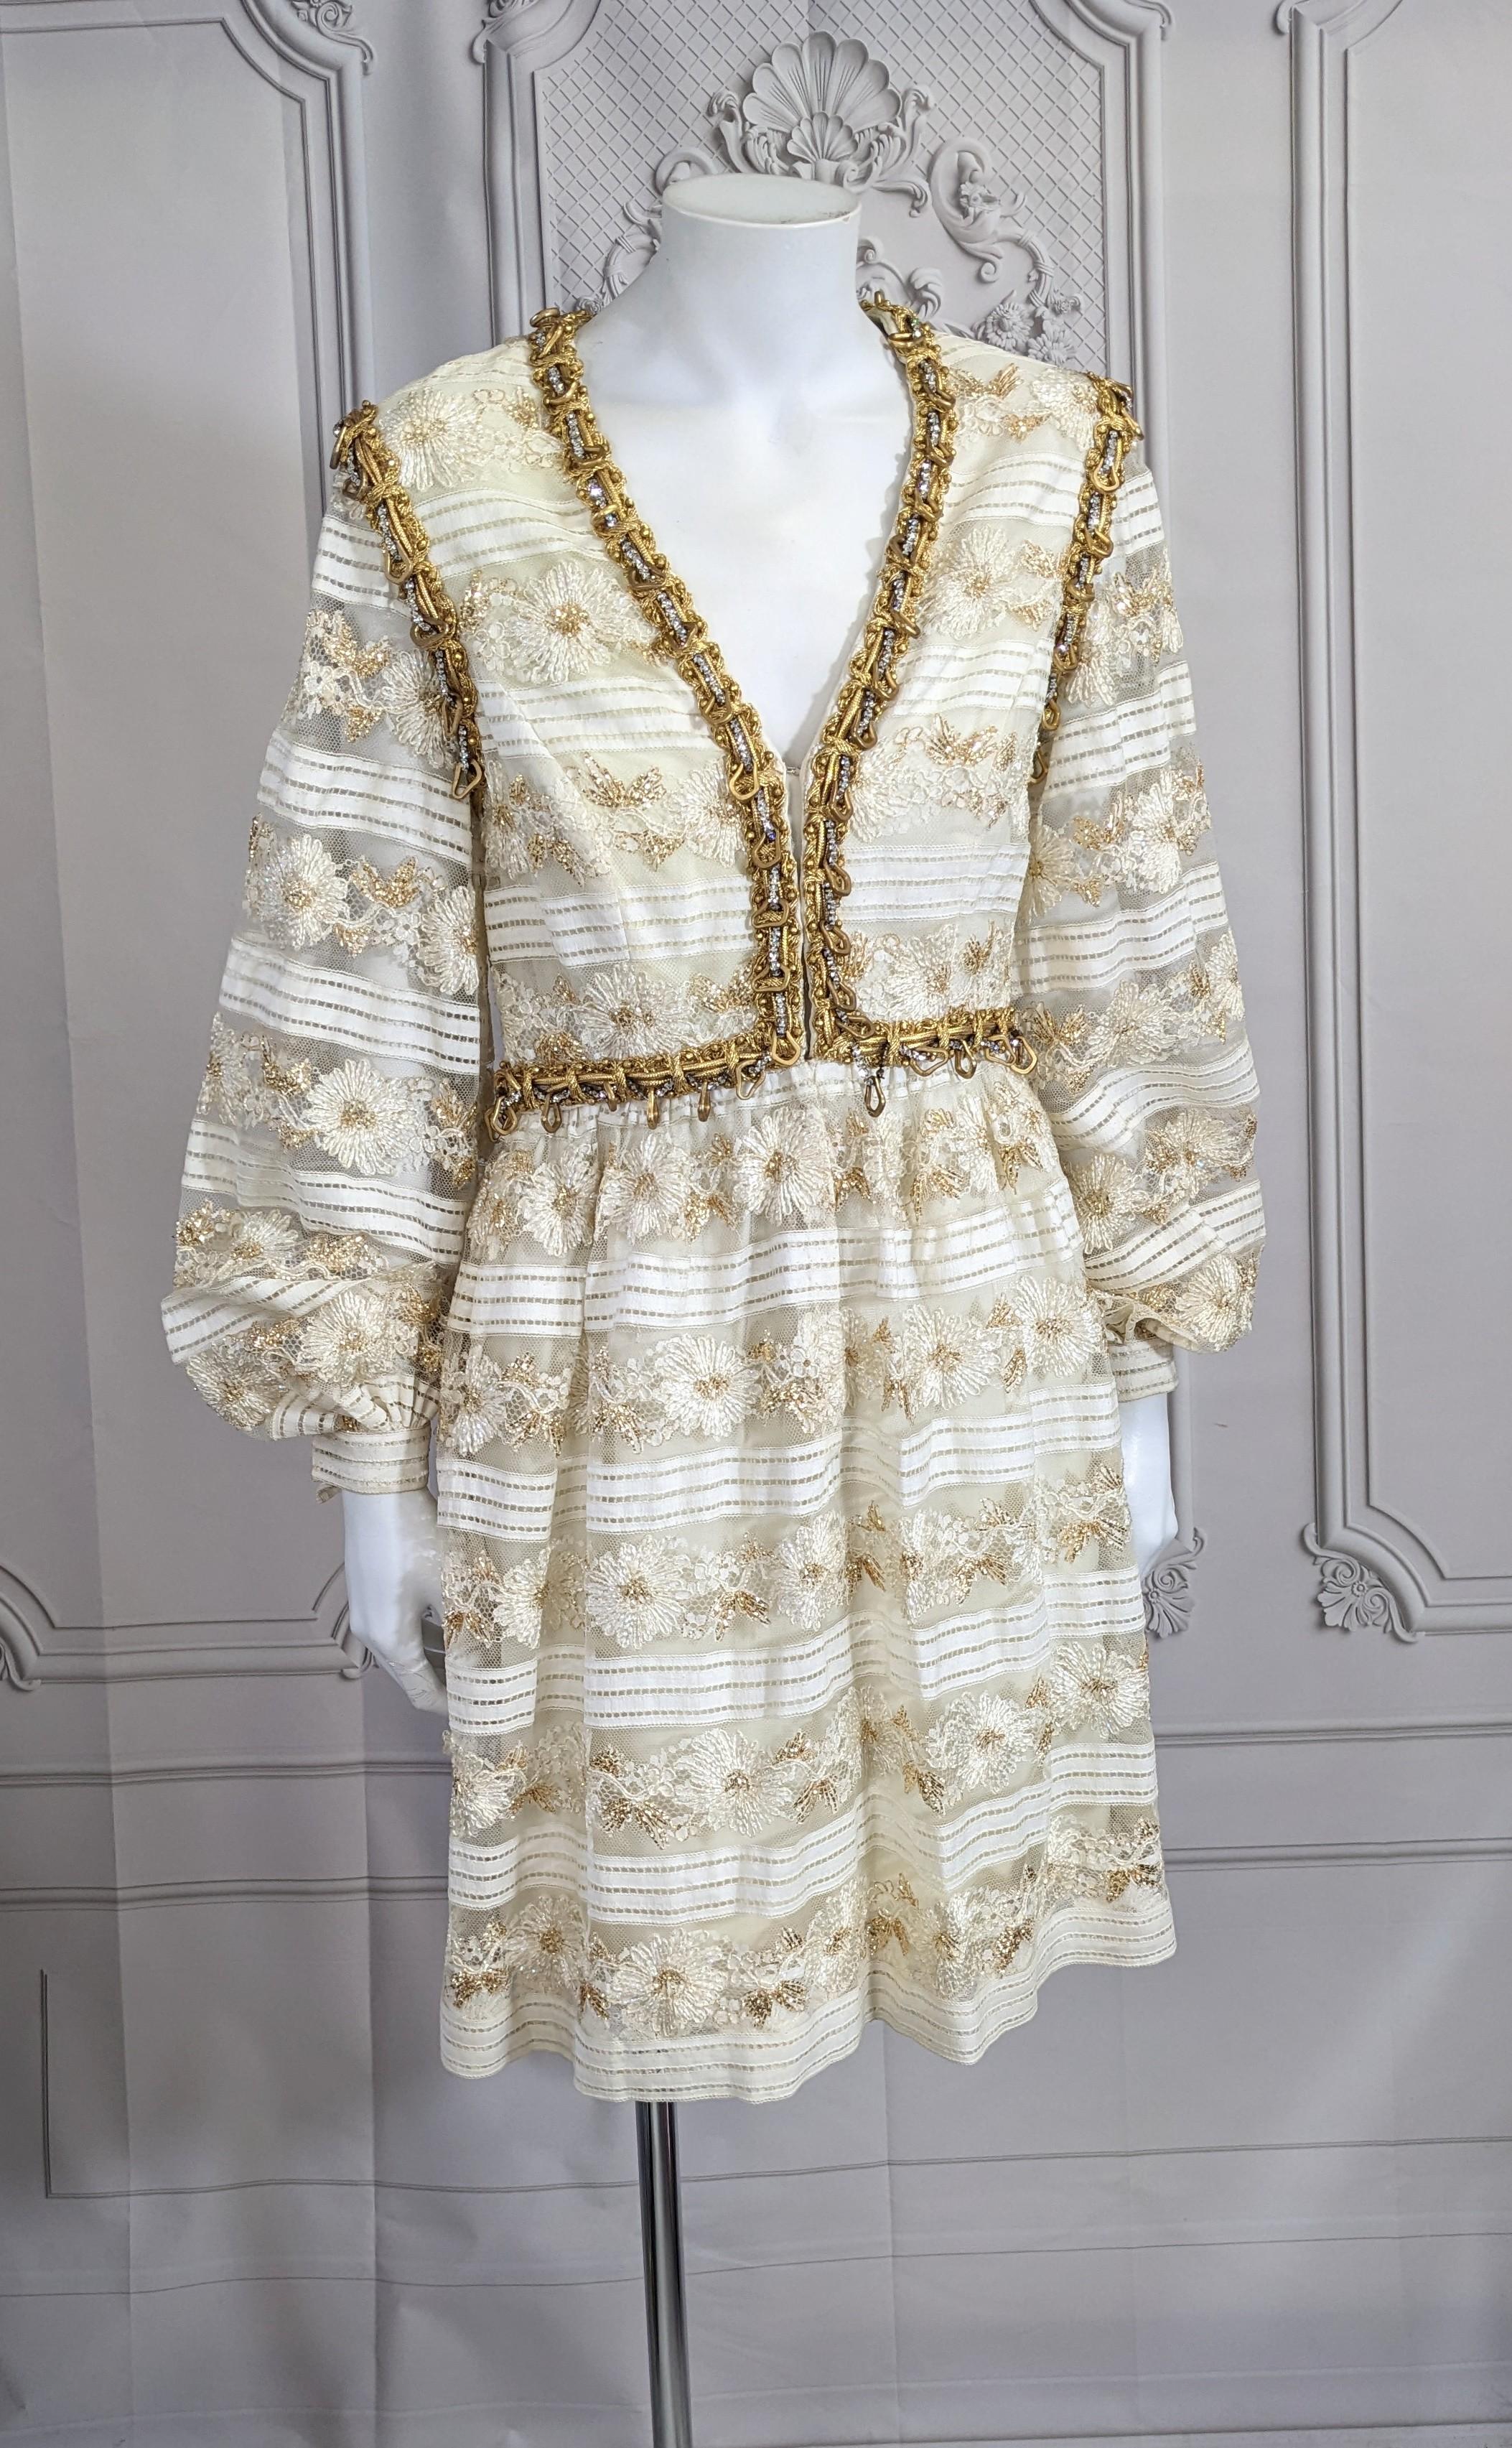 Oscar de la Renta Gilt Floral Reembroidered Lace Mini Baby Doll Dress from the 1960's. Designed as a mini with full sheer sleeves with a faux bolero edged in elaborate gold bullion and rhinestone trim with gilt hoops. Opens down front with hooks and